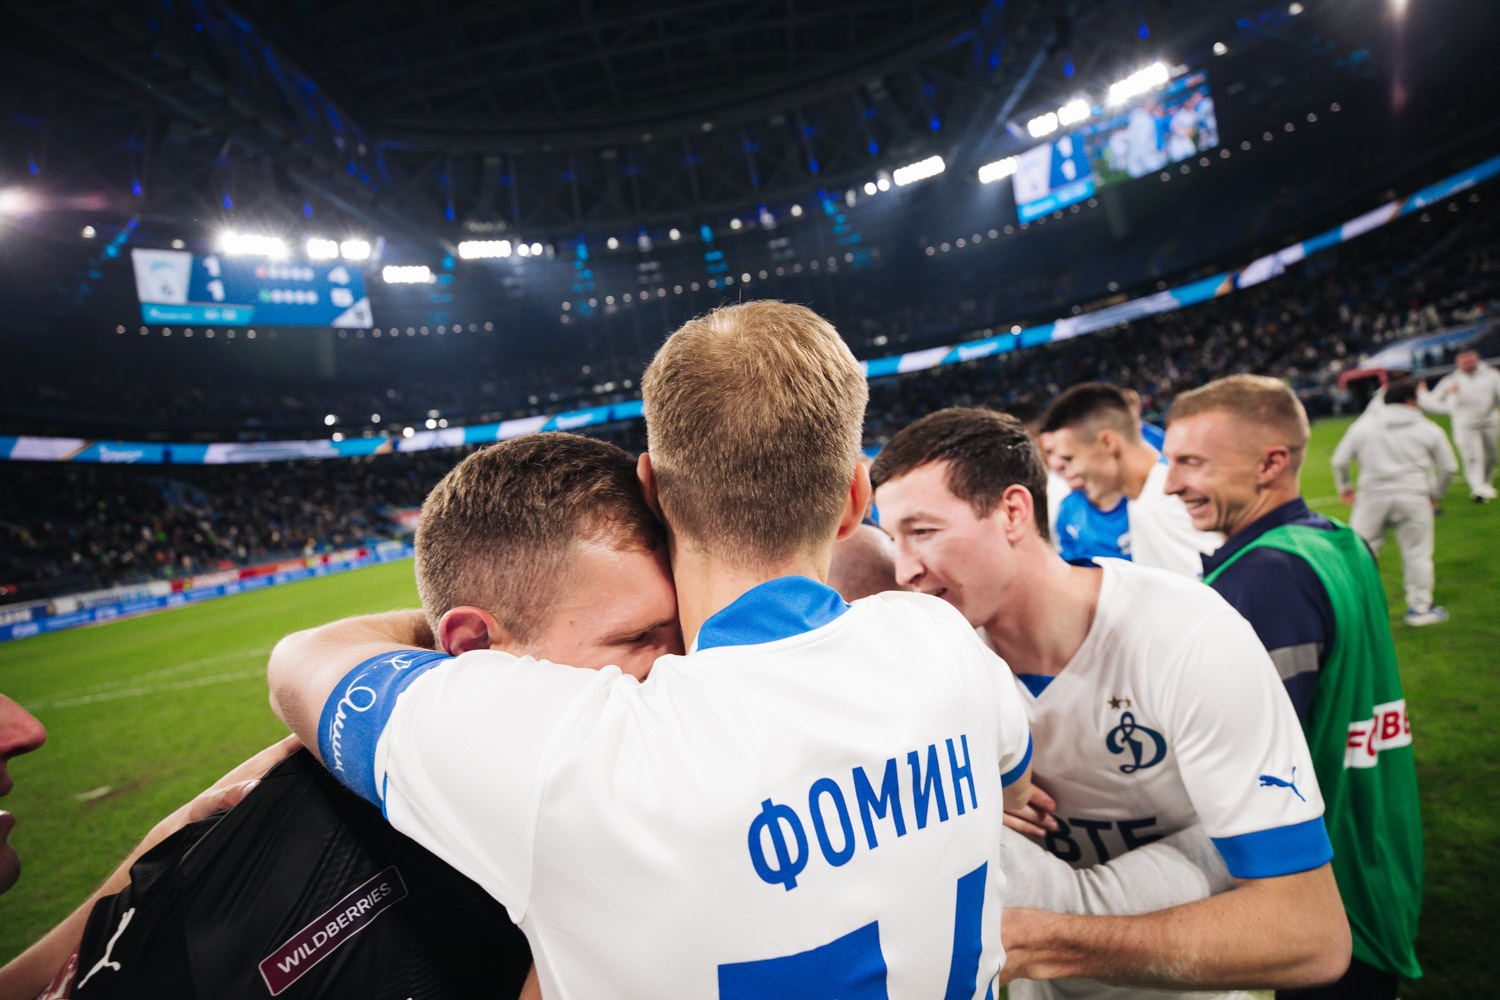 Photo gallery from away Cup game against Zenit